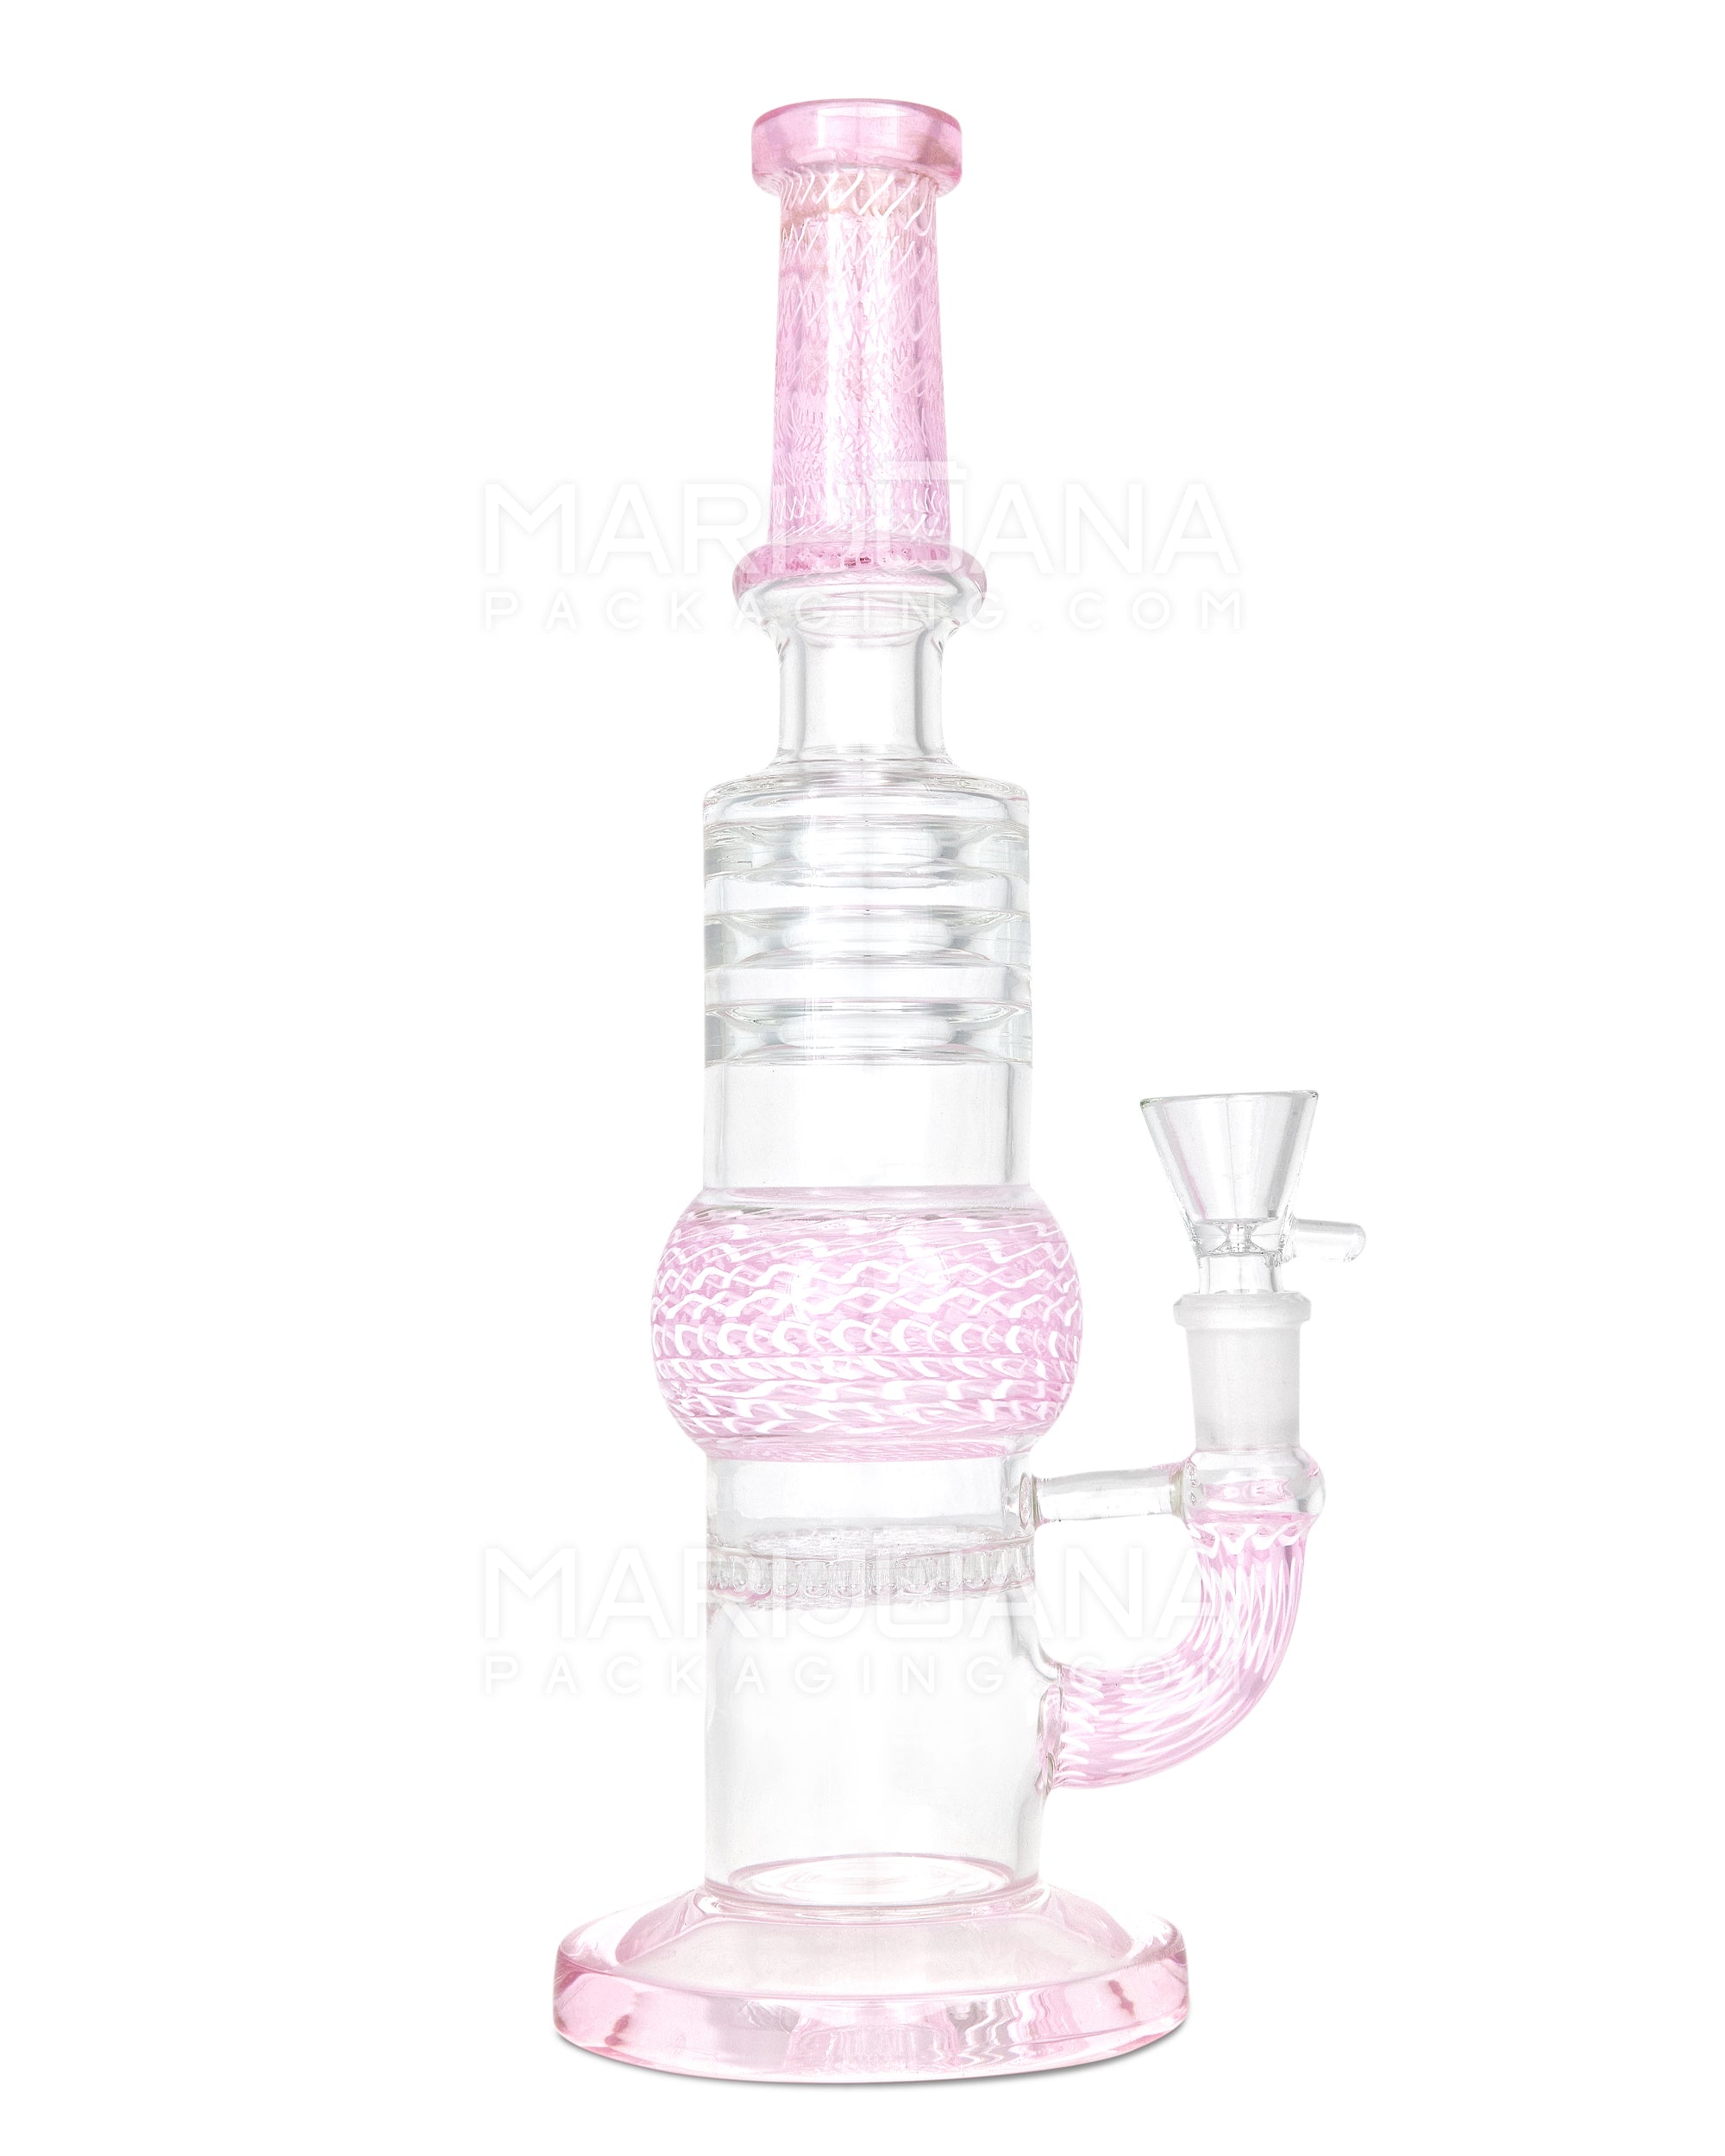 Straight Neck Honeycomb Perc Zanfirico Glass Water Pipe w/ Ice Catcher | 11in Tall - 14mm Bowl - Pink - 1